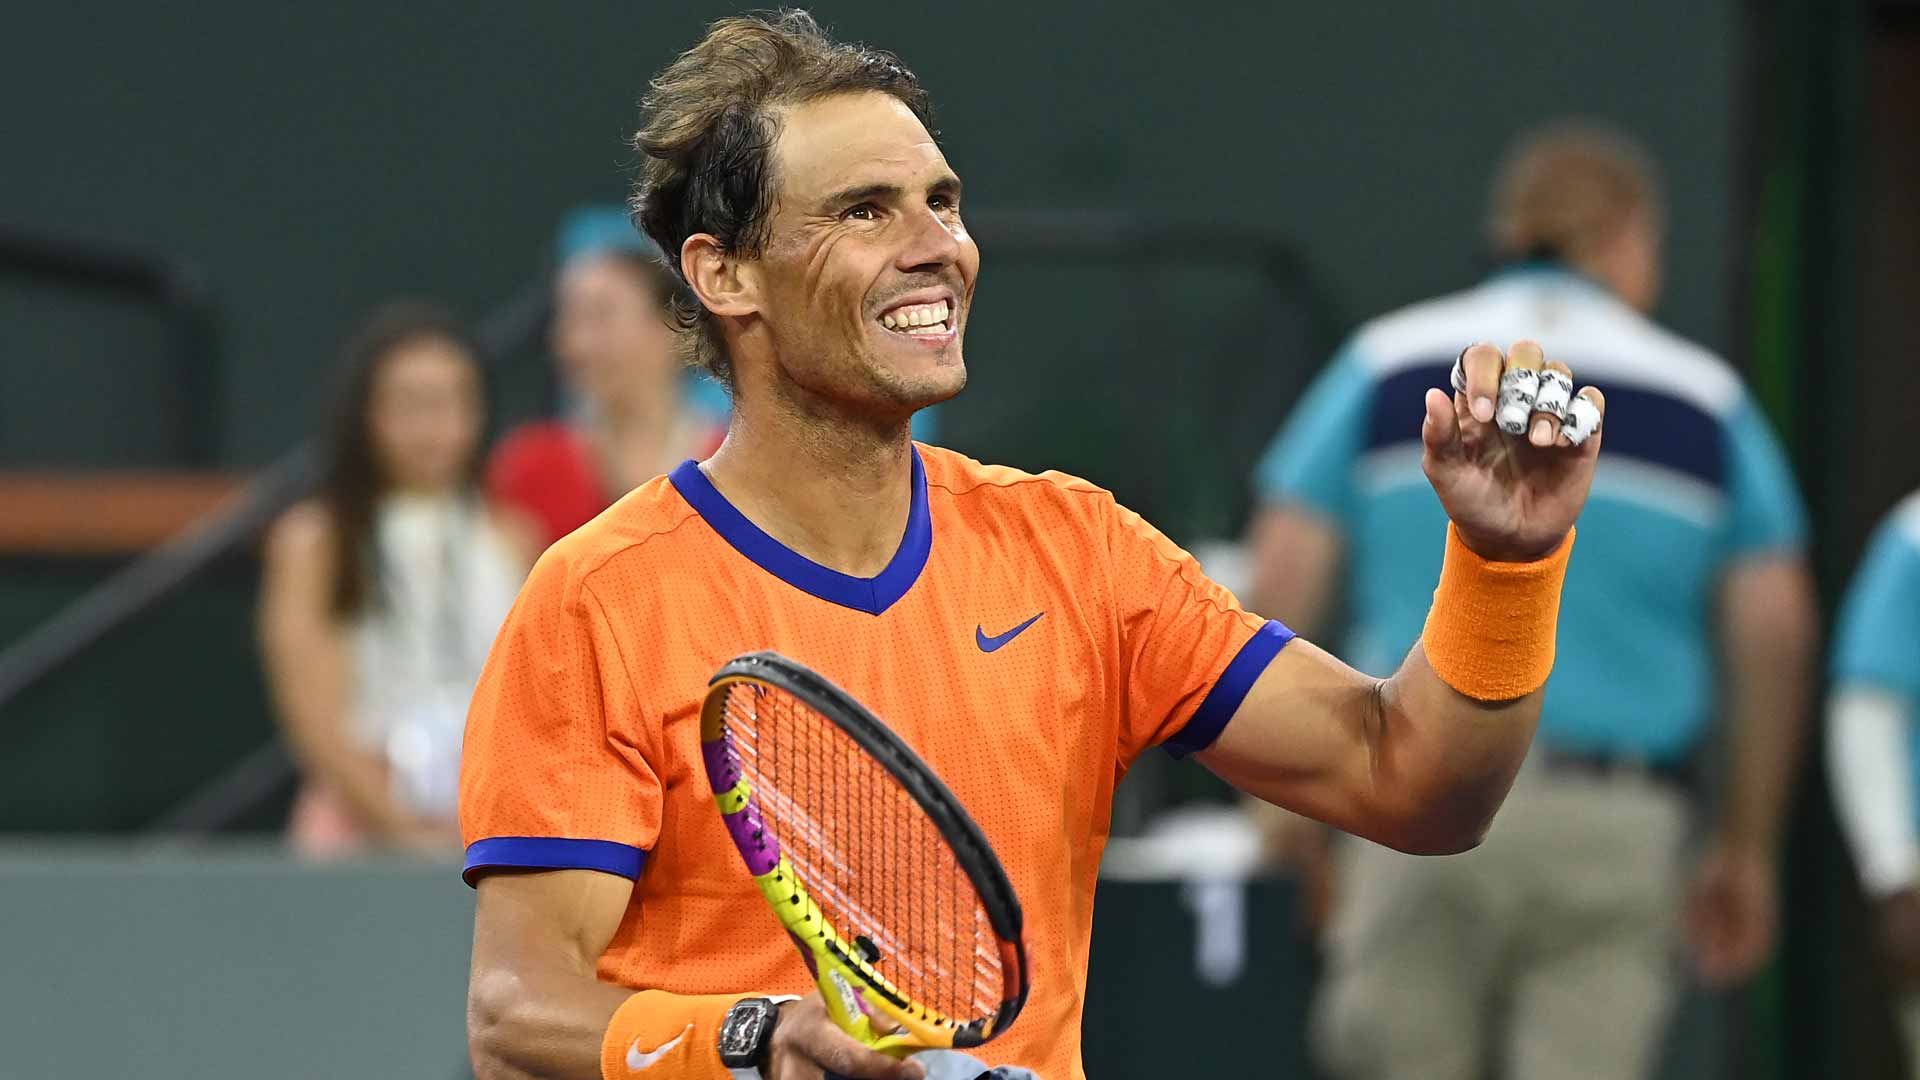 Find out when Rafael Nadal will play first round at Indian Wells ATP